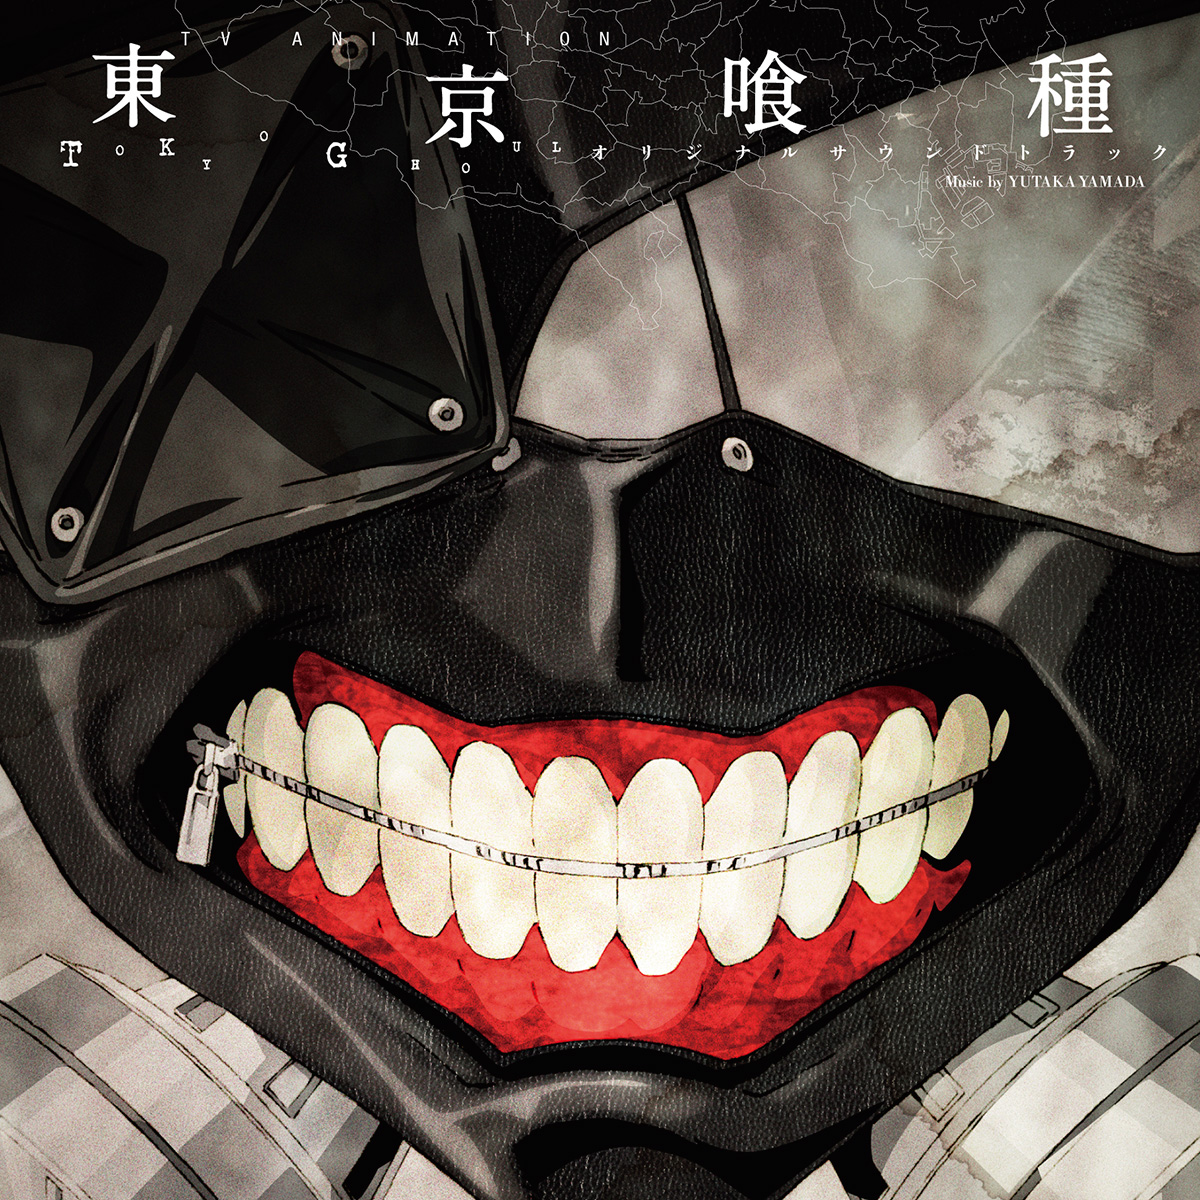 tokyo ghoul theme song download